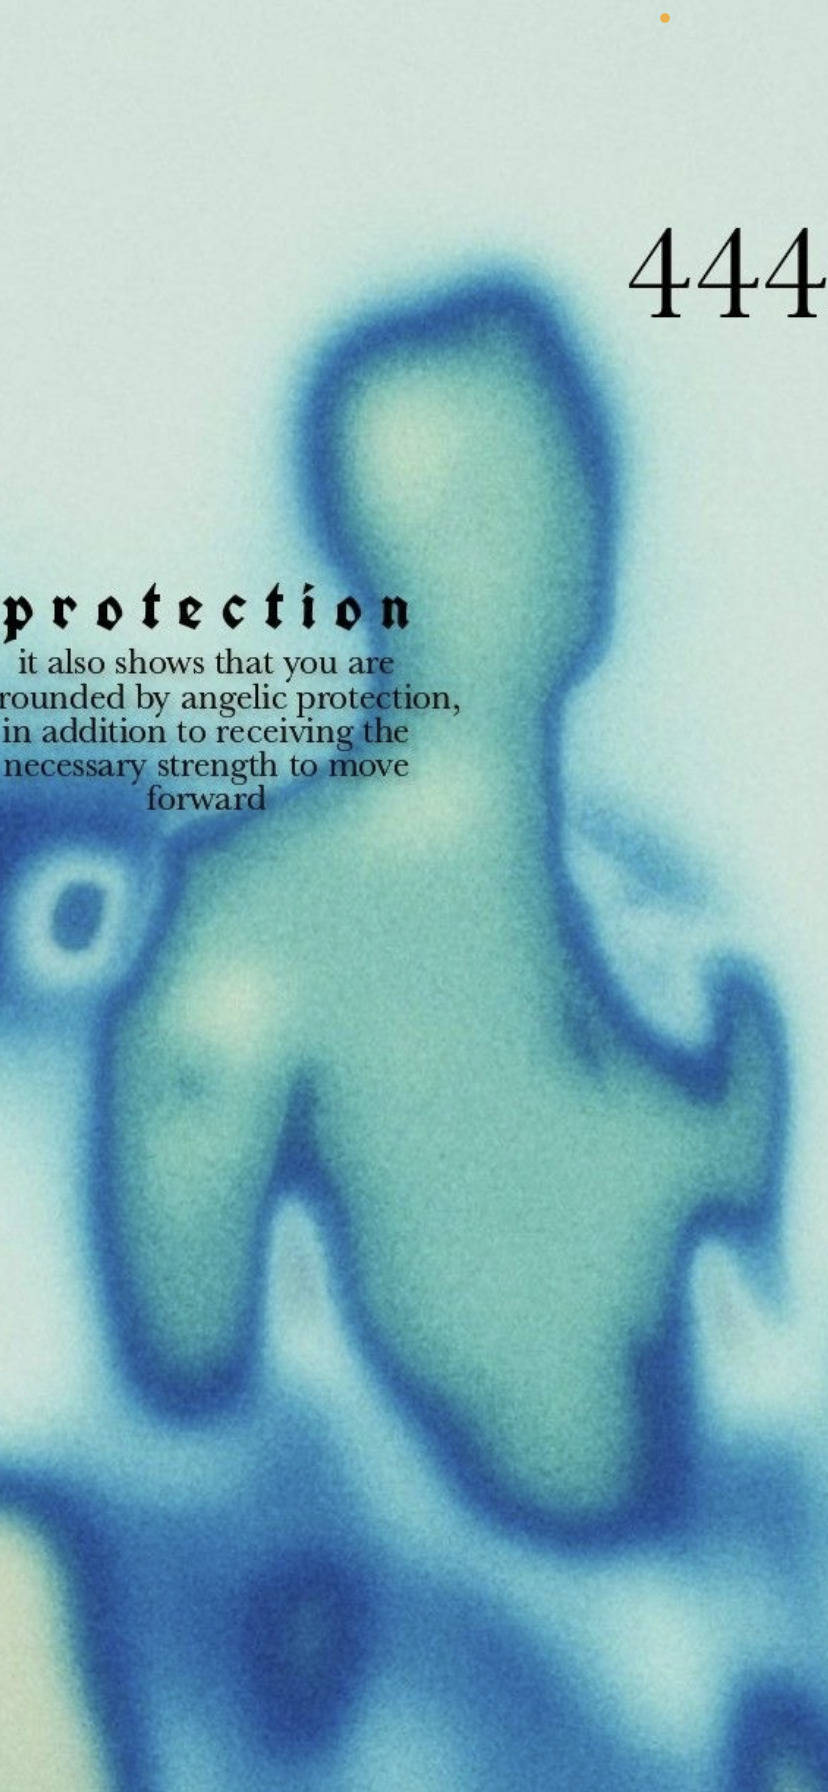 Download 444 Protection Aura Aesthetic Wallpaper